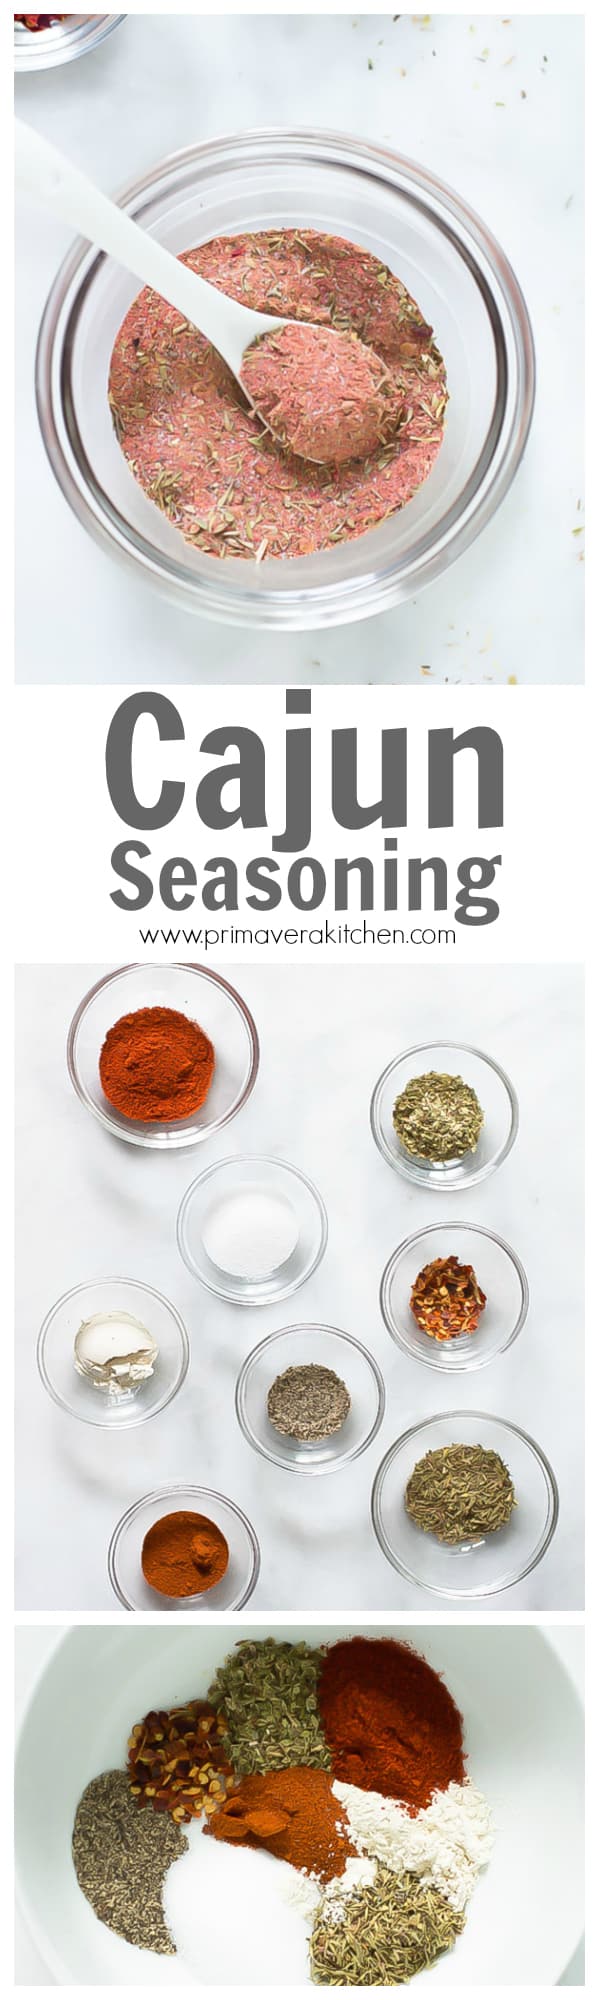 cajun seasoning - This flavorful Cajun Seasoning recipe is made with red pepper flakes, onions, garlic and herbs. It is great with chicken, fish, shrimp and more.